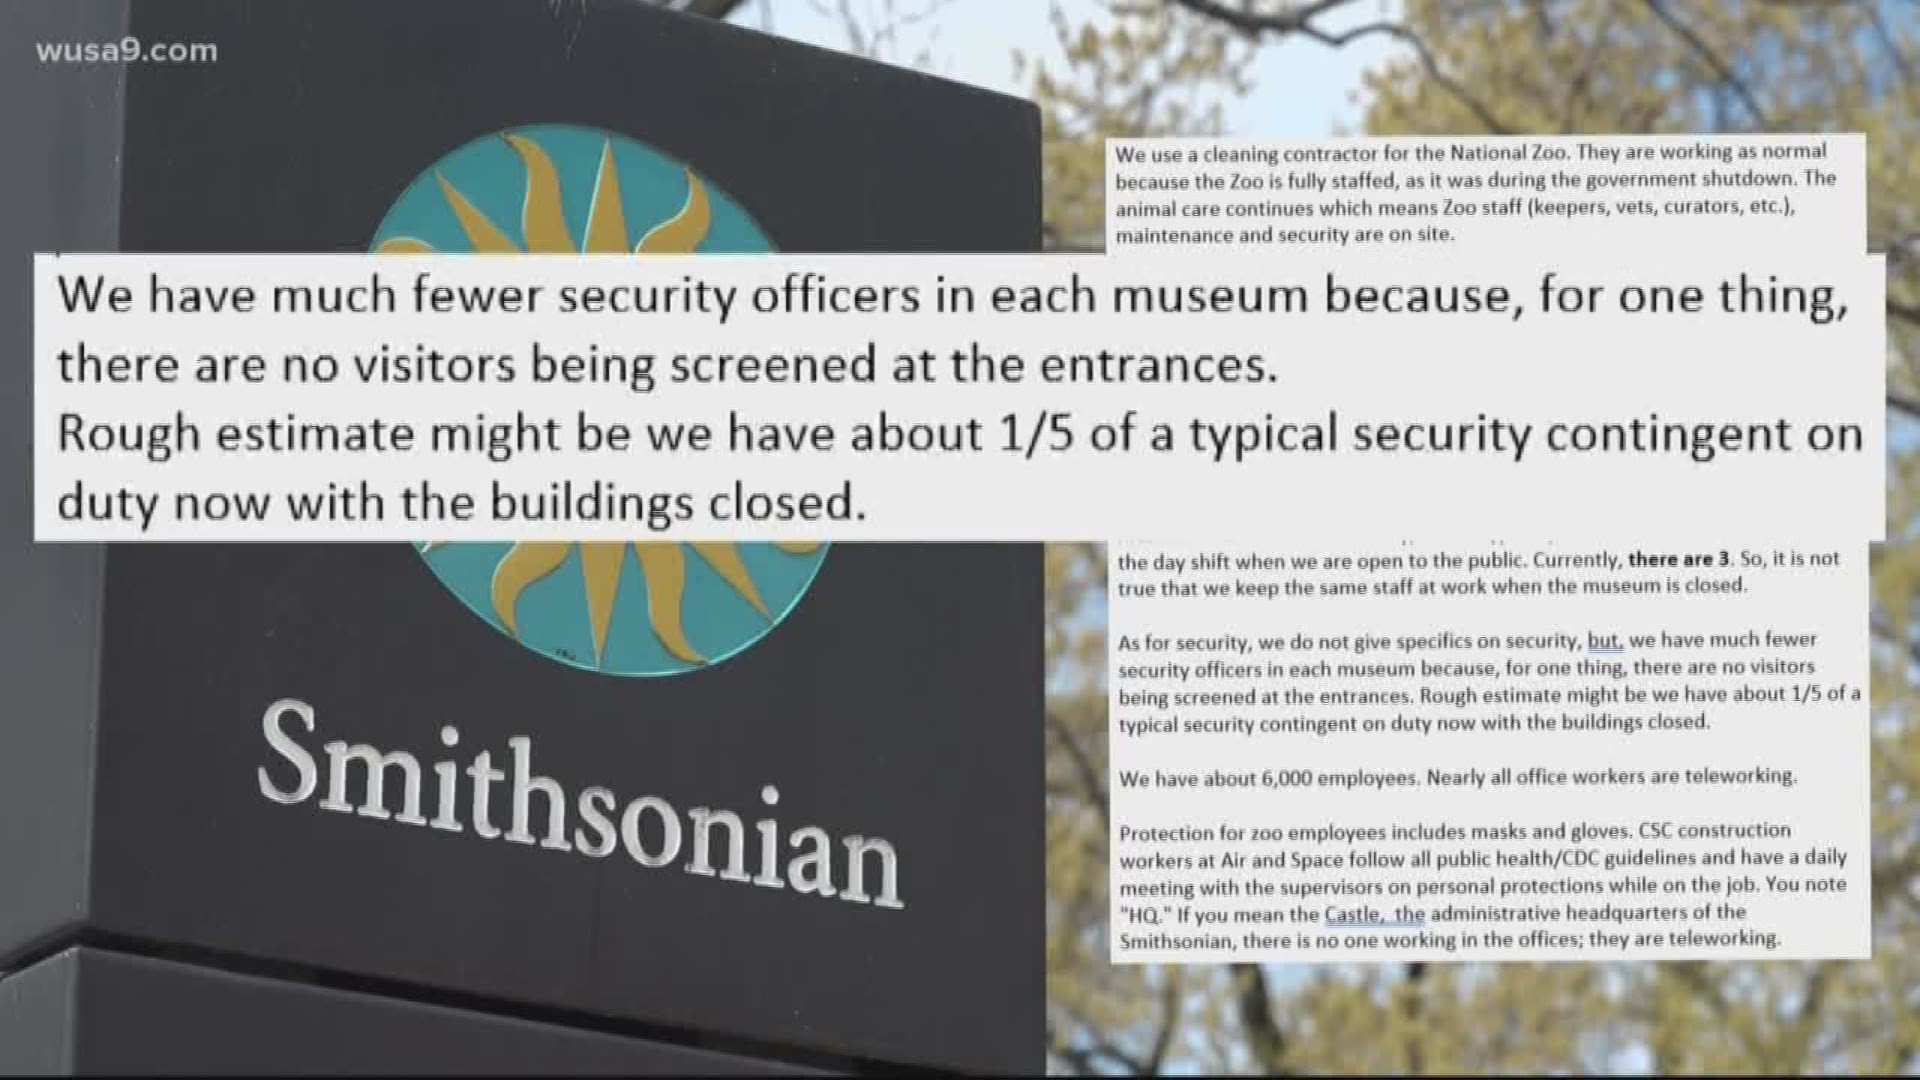 At least one employee told WUSA9 that there are at least 20 non-essential people in the museums every day.